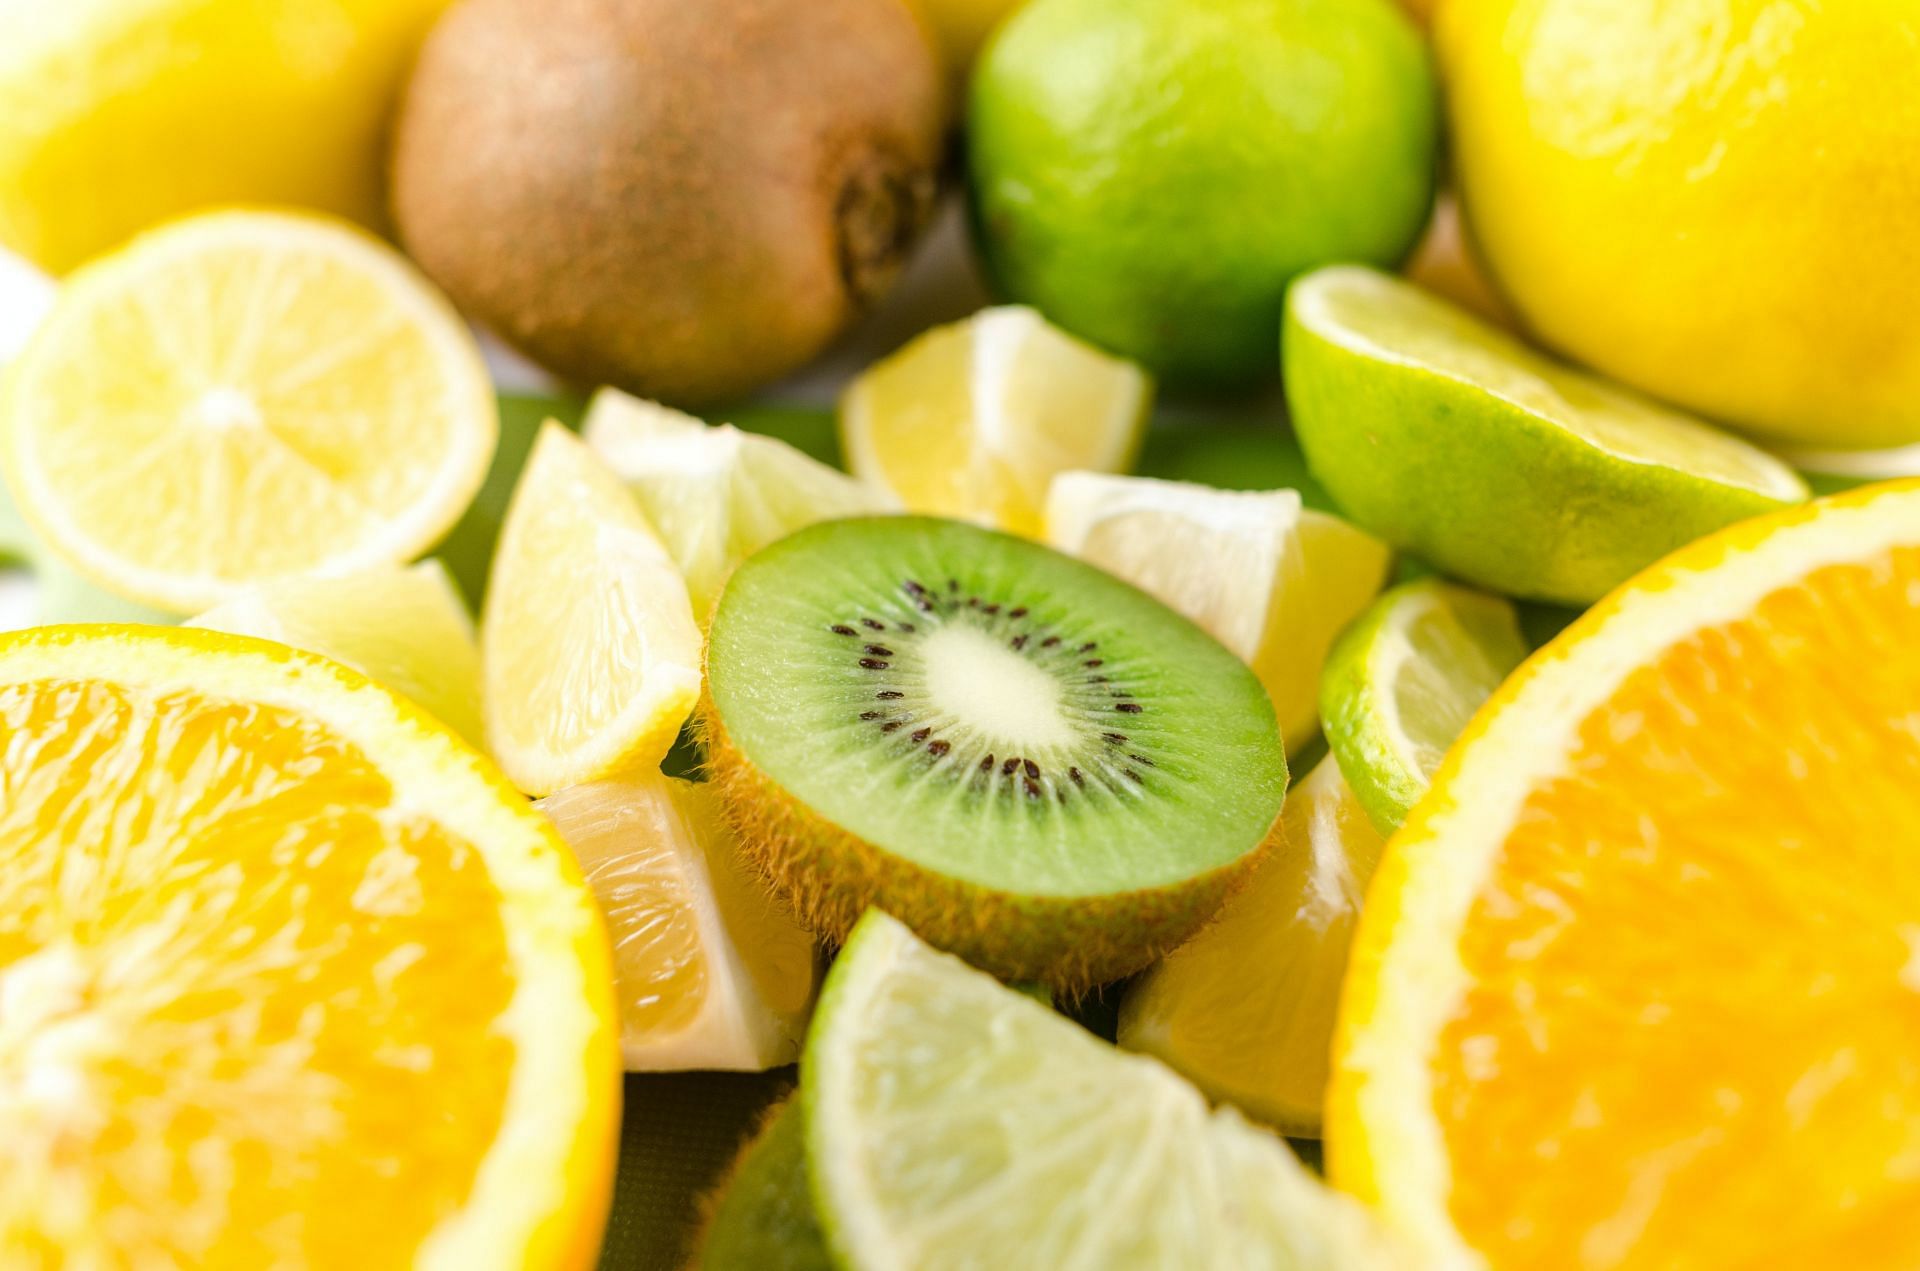 Fruits having a higher content of vitamin C can help improve collagen level. (Image via Pexels@Lukas)